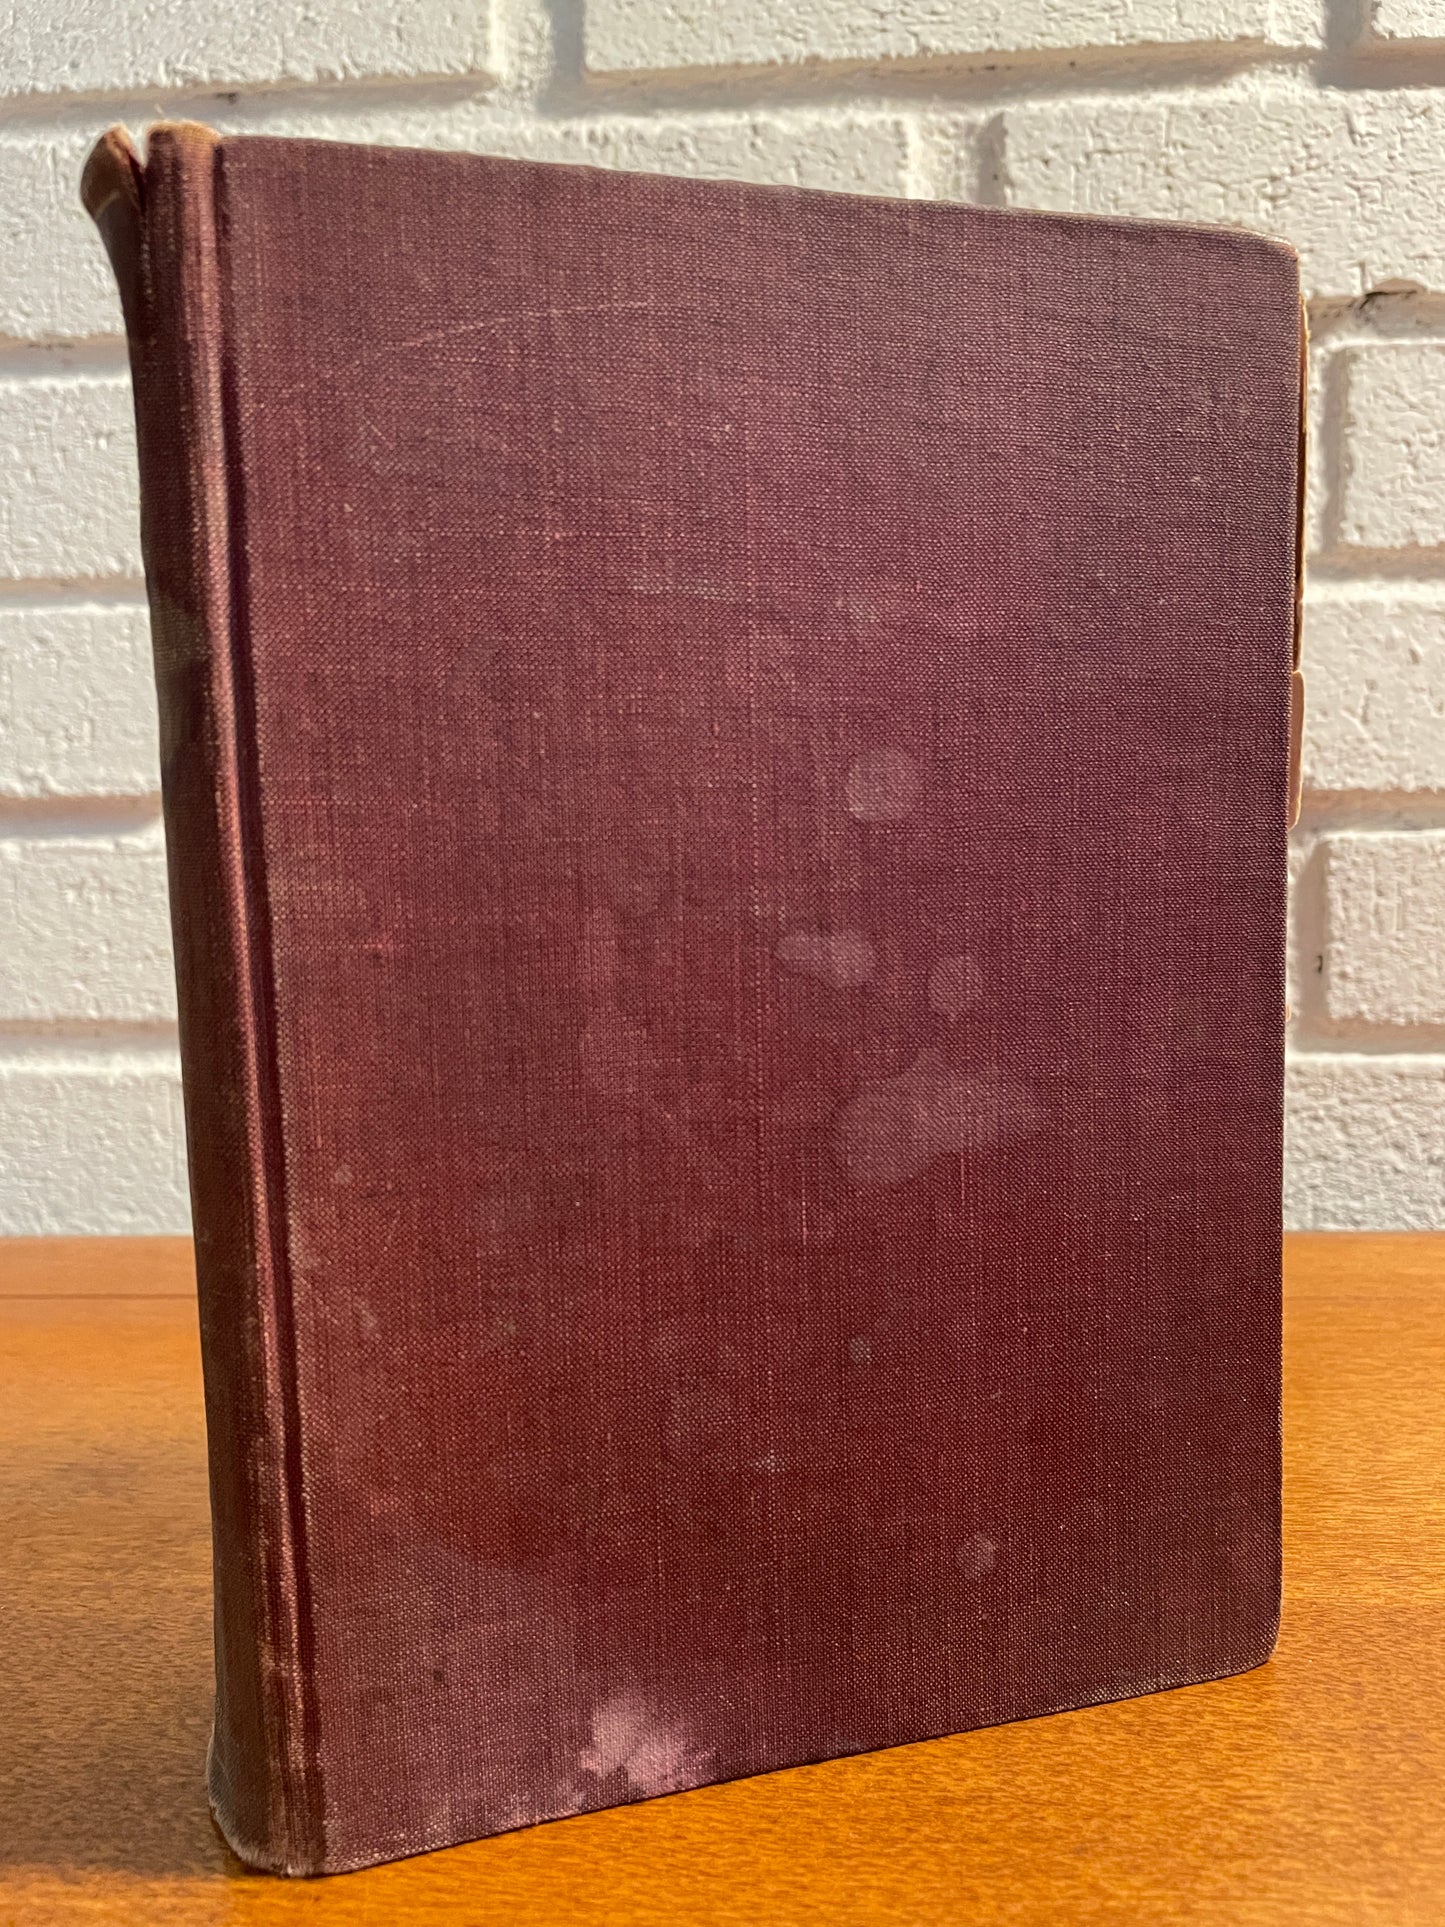 A History of The Nineteenth Century Year by Year Edwin Emerson, 1902 Volume 3